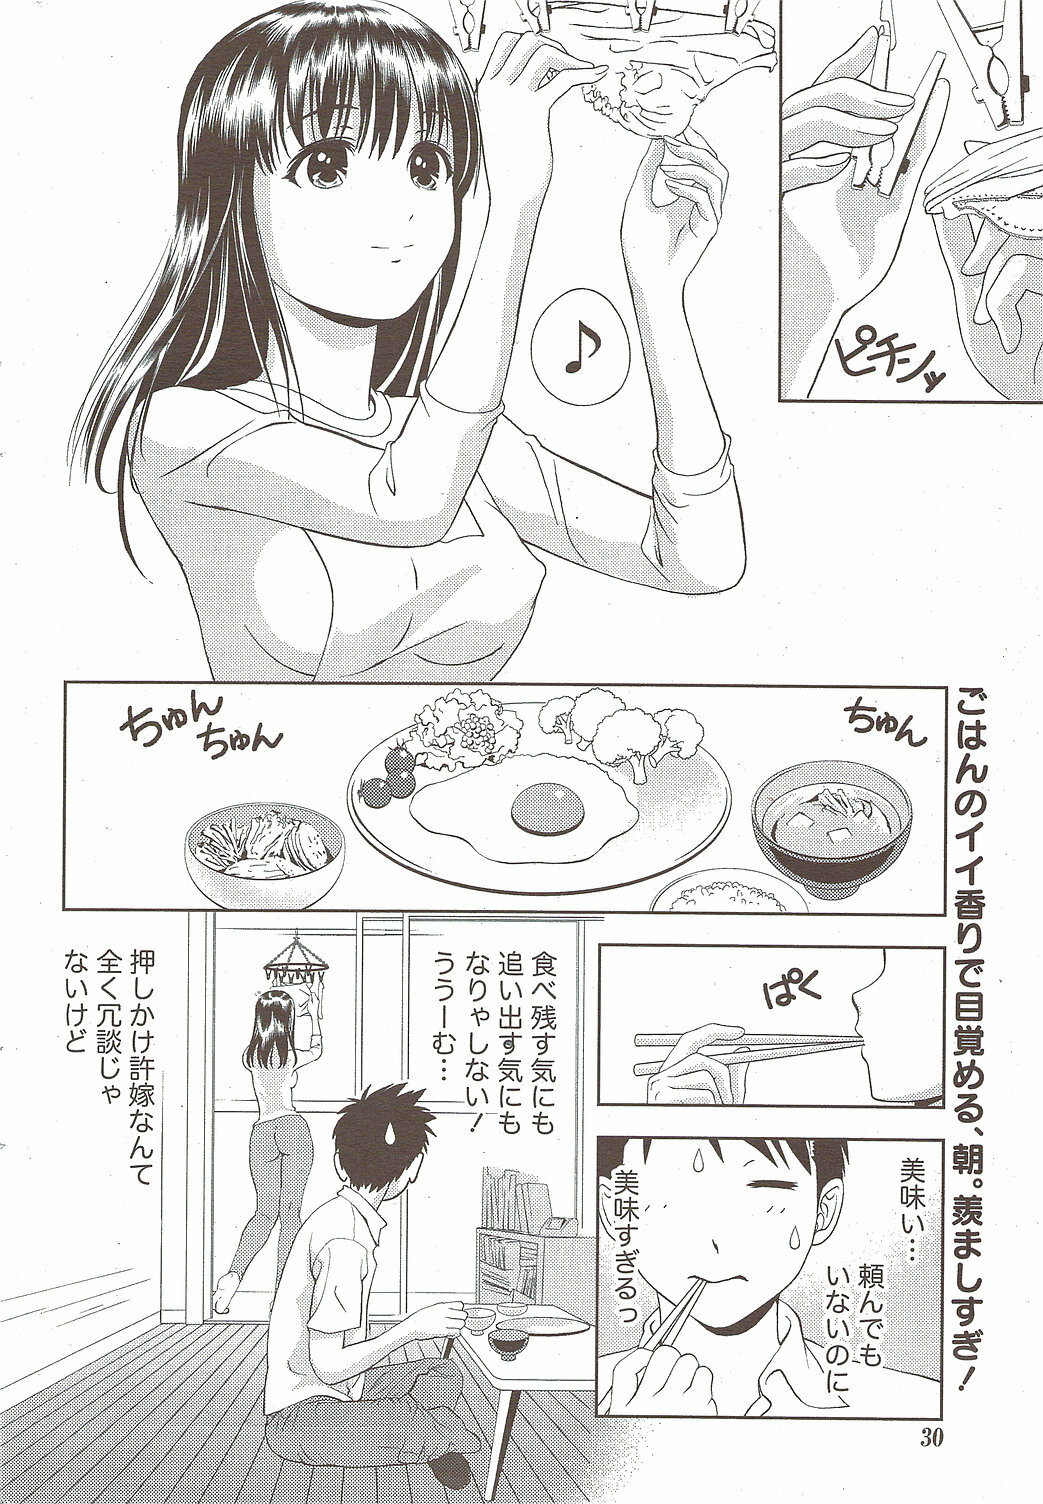 Monthly Vitaman 2009-12 page 30 full